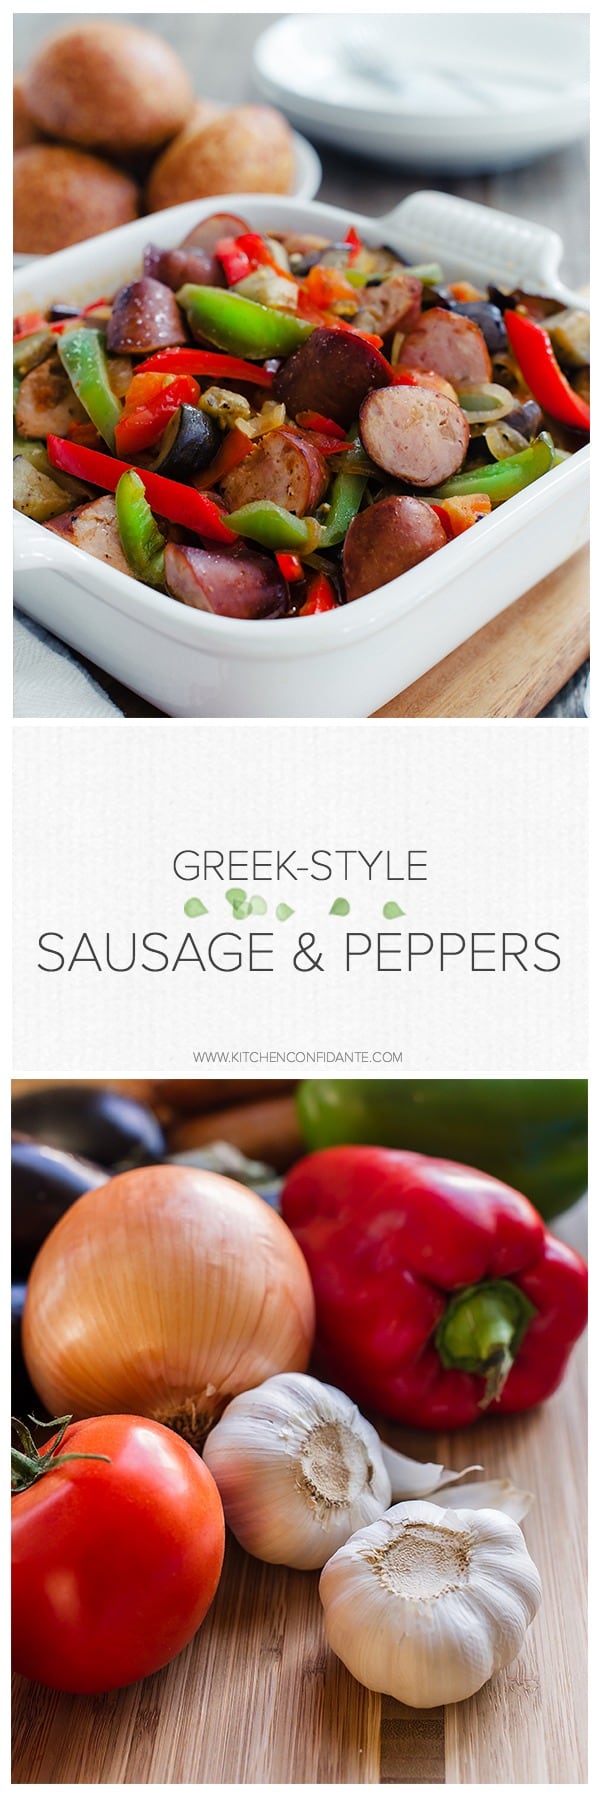 Greek Style Sausage and Peppers | www.kitchenconfidante